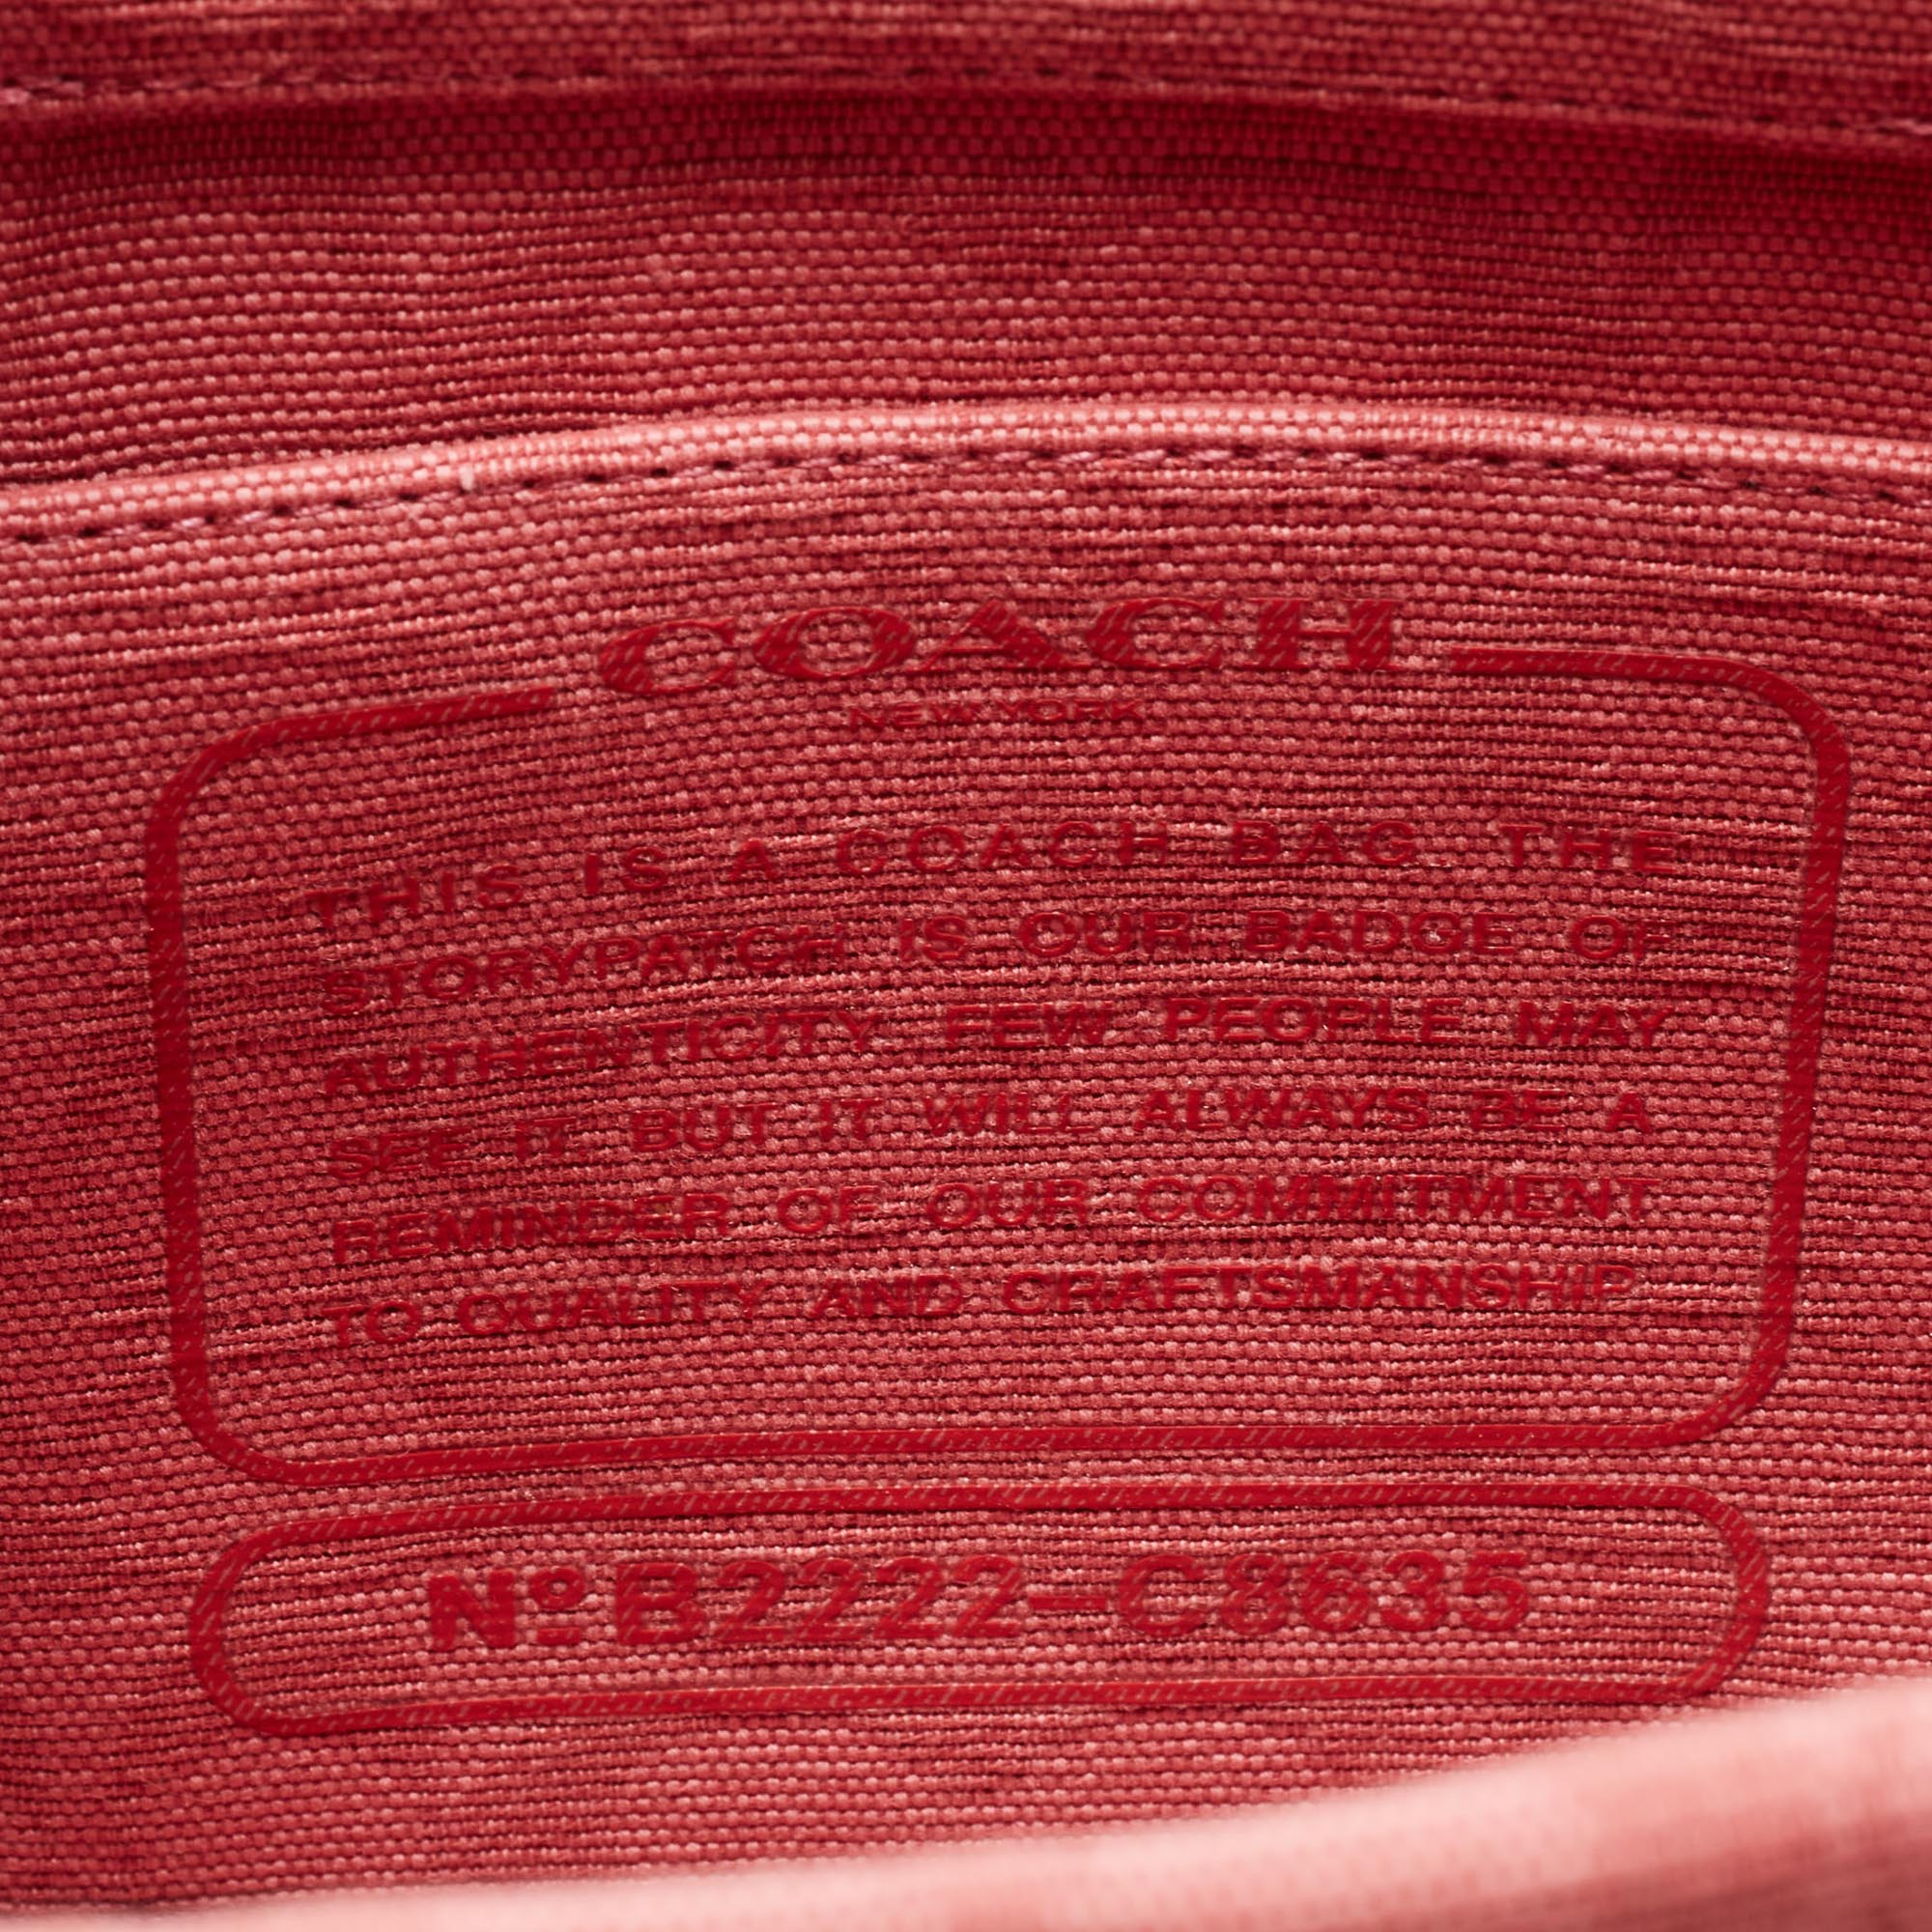 Coach Red/Pink Signature Canvas Spin 27 Tote